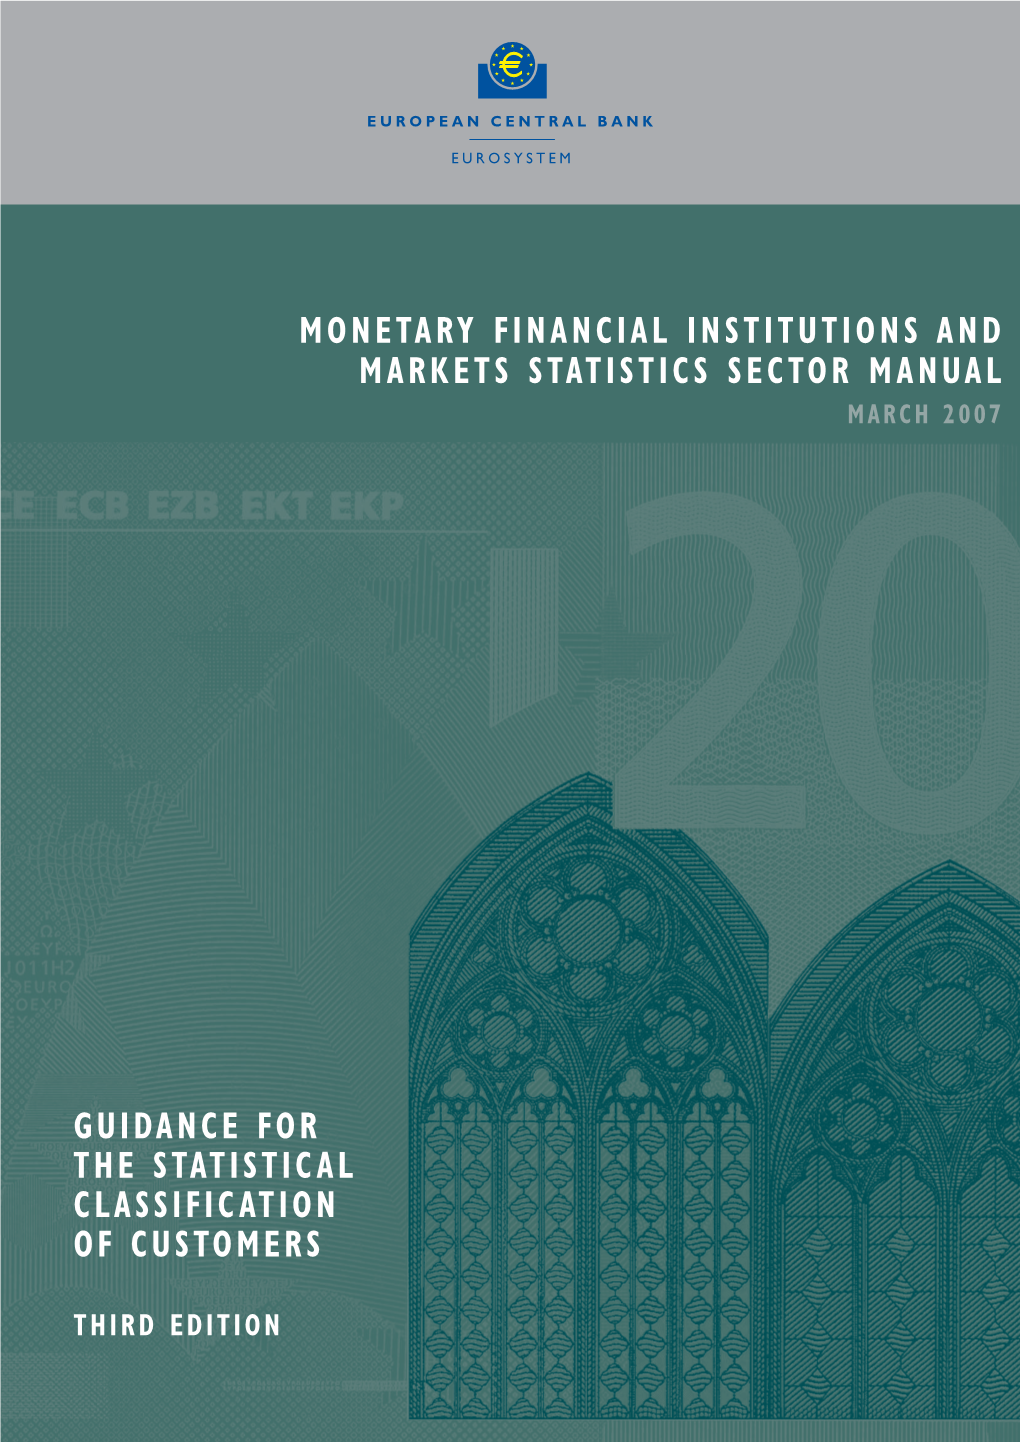 Monetary Financial Institutions and Markets Statistics Sector Manual March 2007